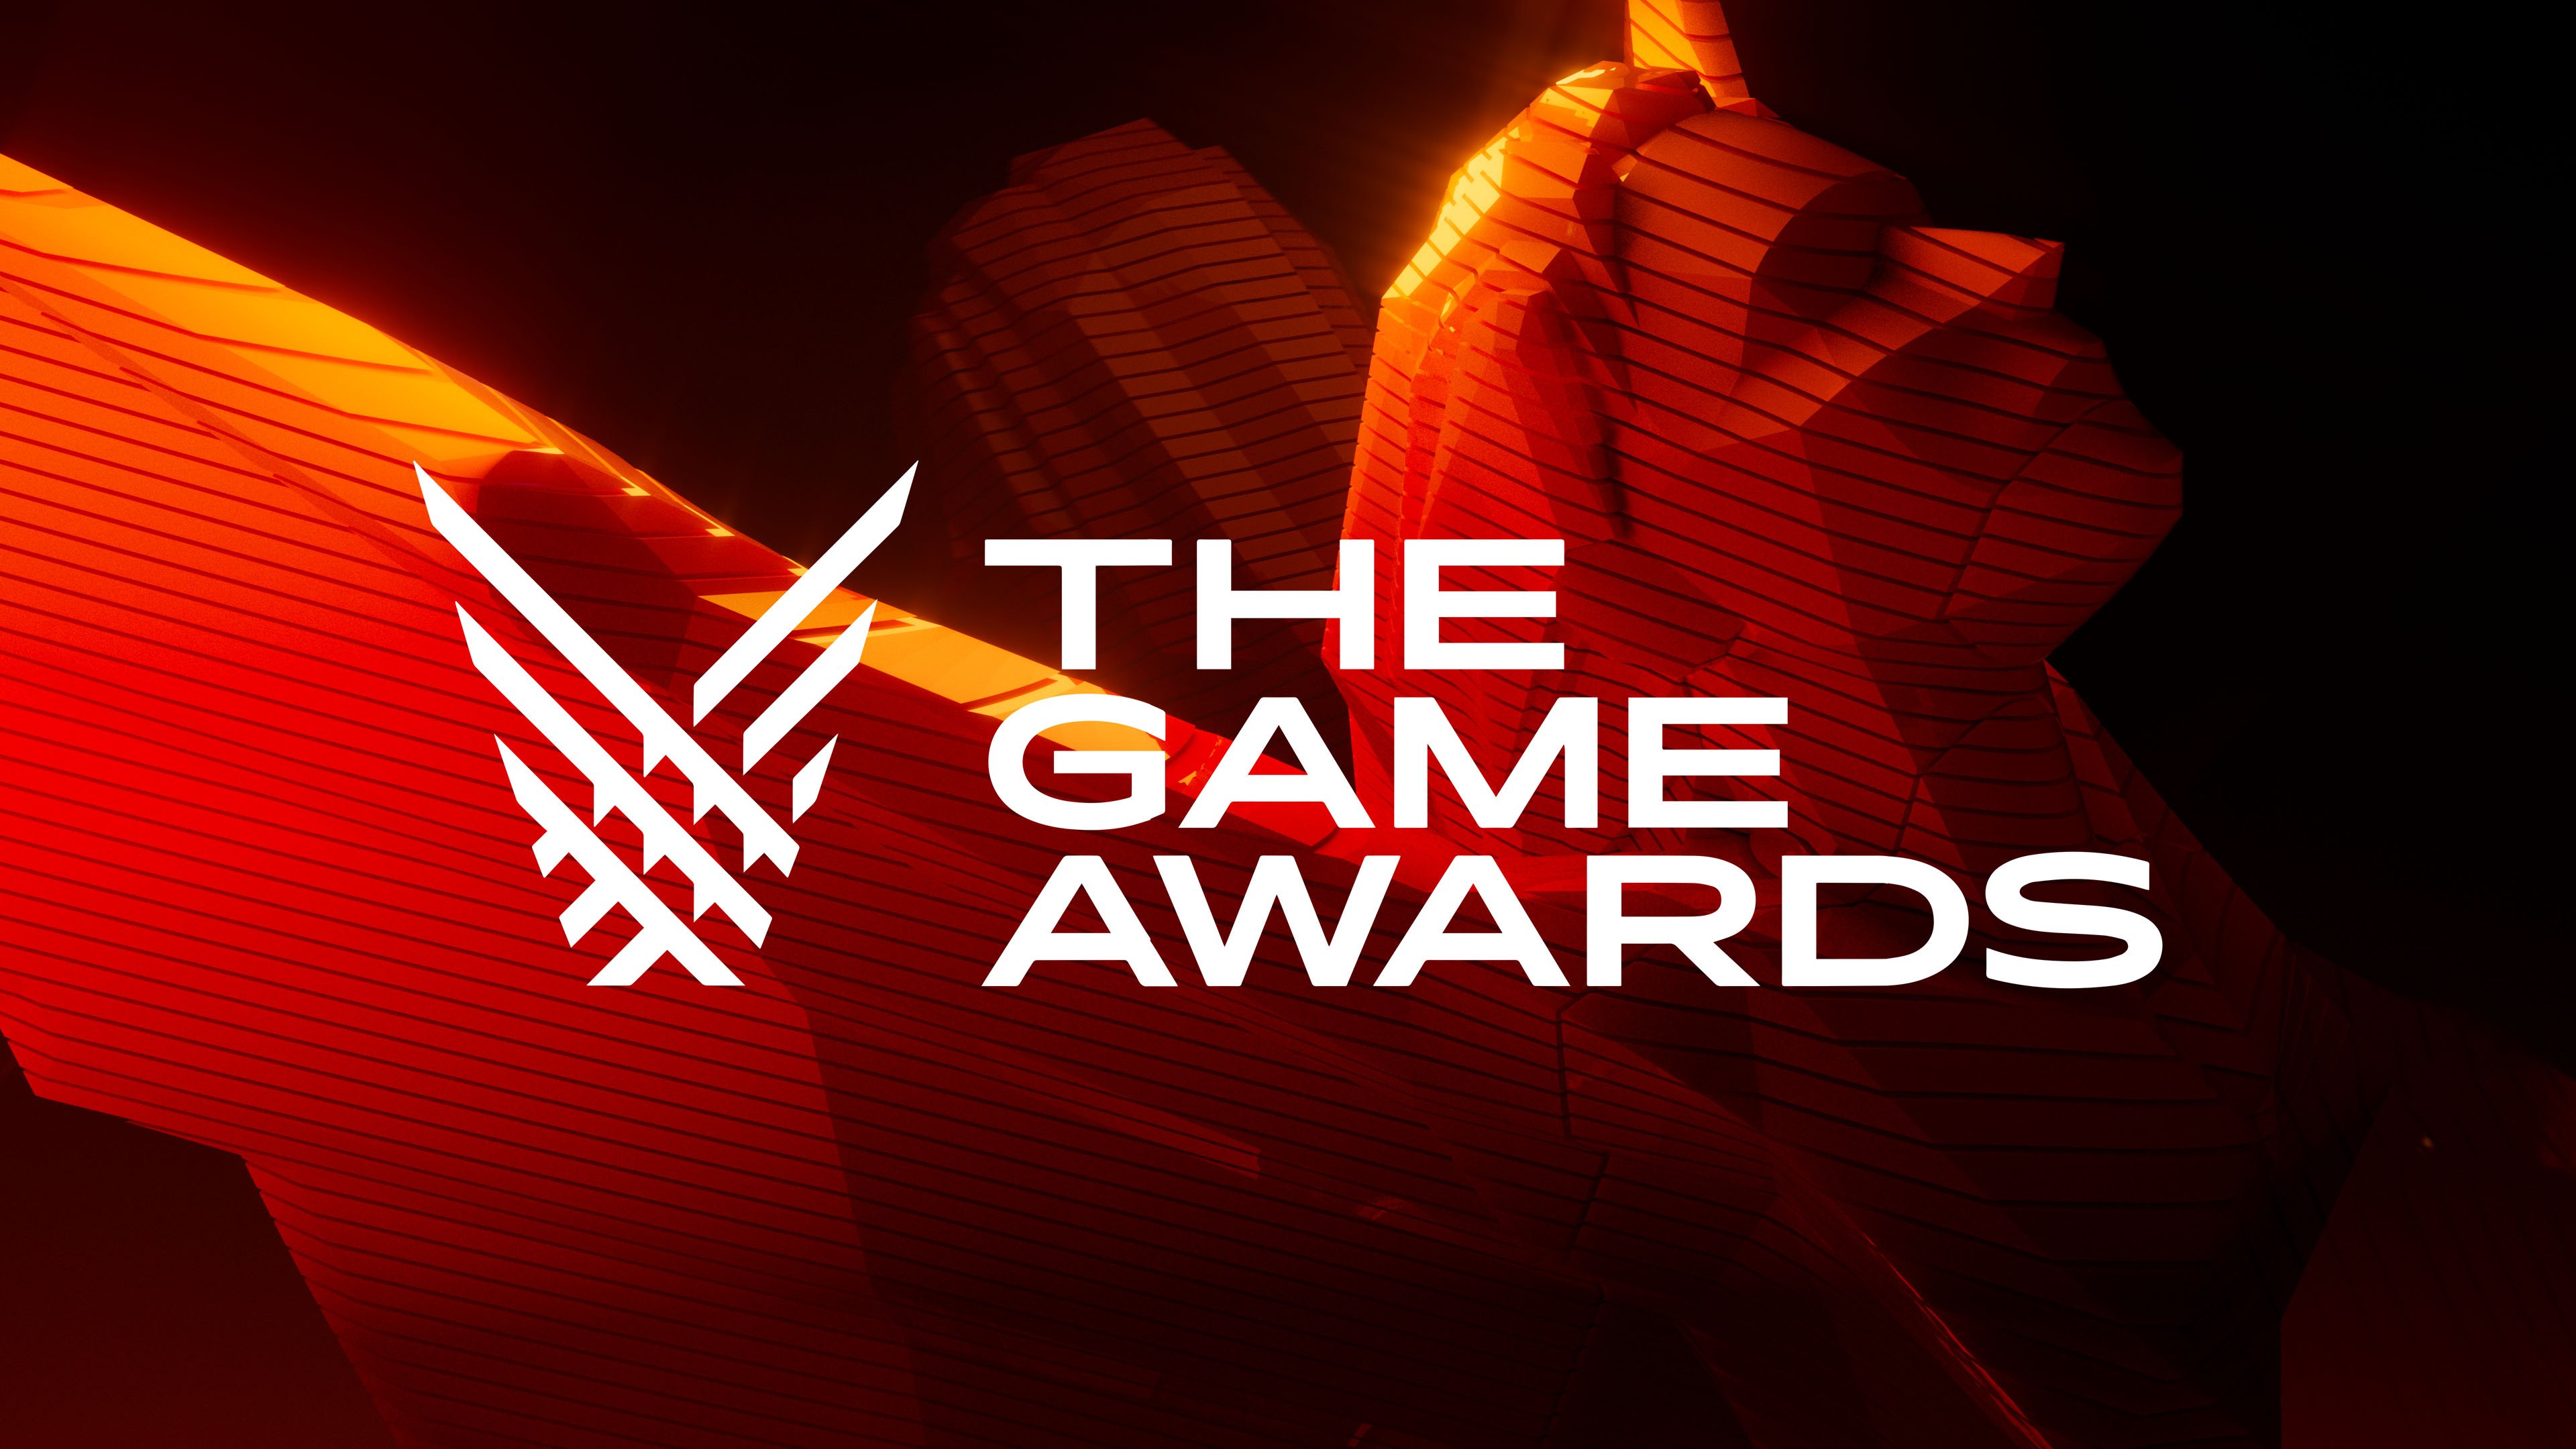 The Game Awards 2022 annouced two biggest winners today